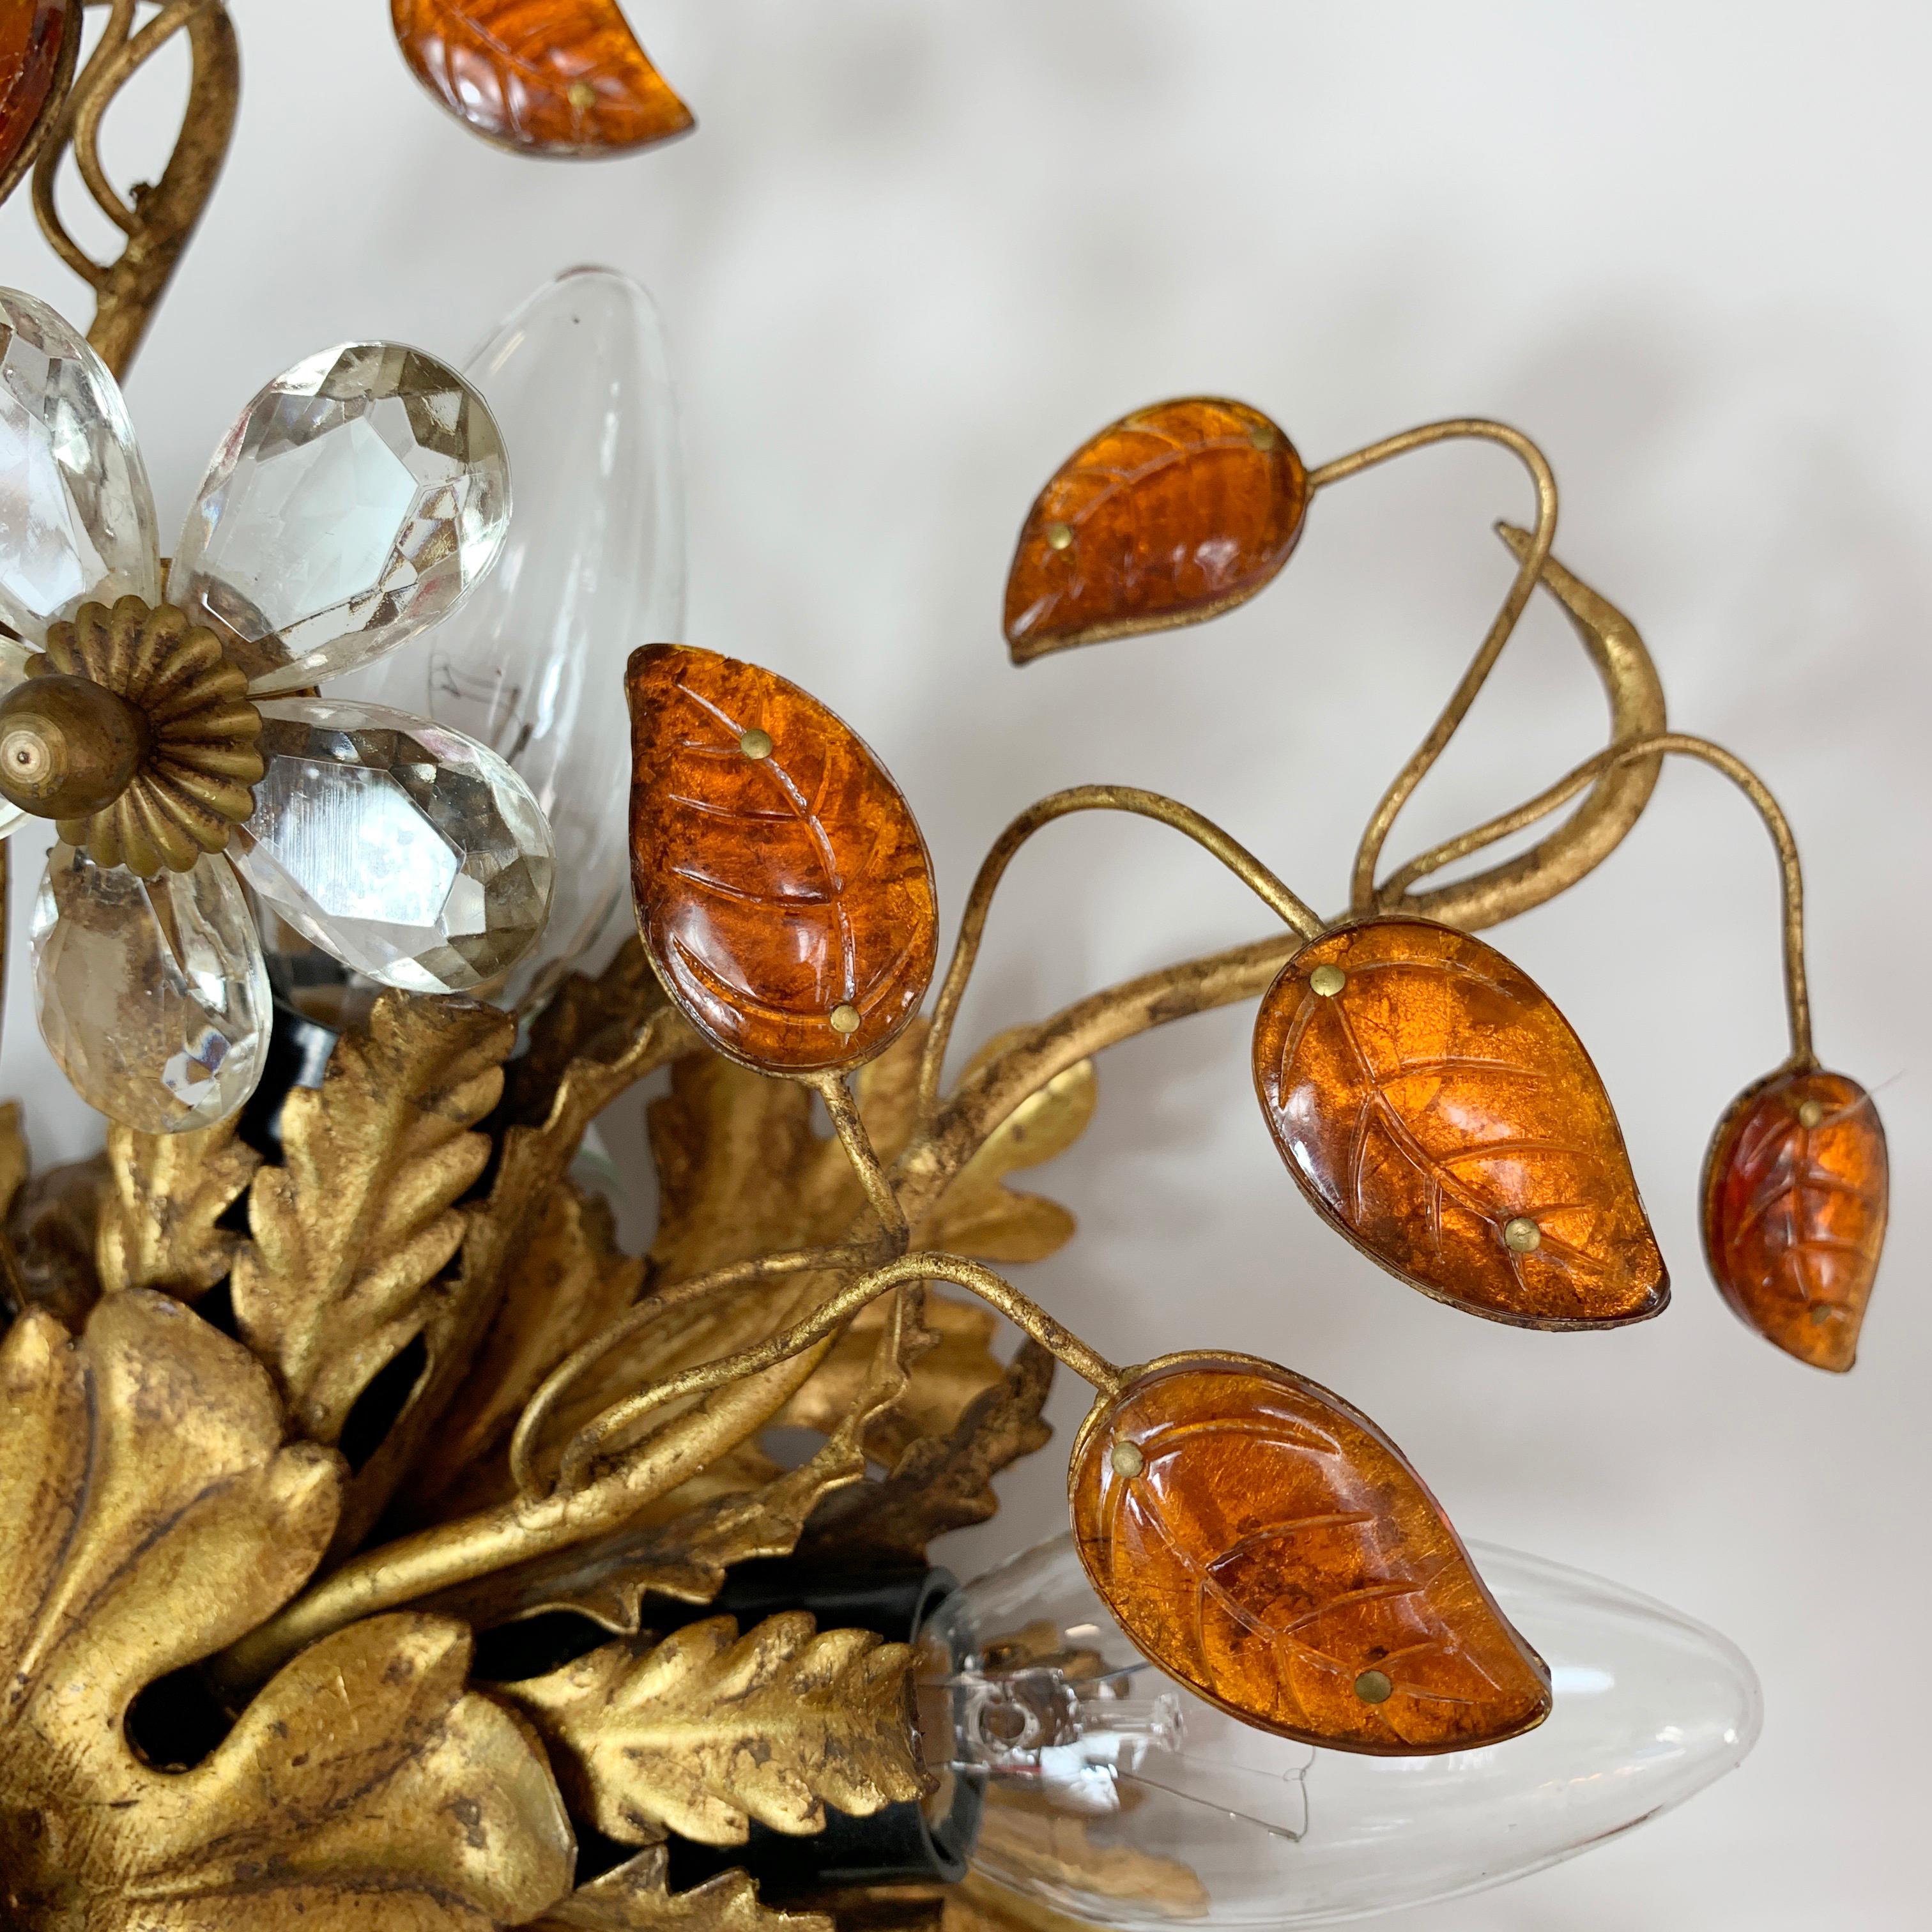 Italian florentine flushmount ceiling light. Banci Firenze, florence (firenze) Italy 1950s. Stunning gilt acanthus leaf design with clear Murano glass flowers and amber Murano glass leaves on Fine gilt stems. Featuring 6 bulb holders, e14 small